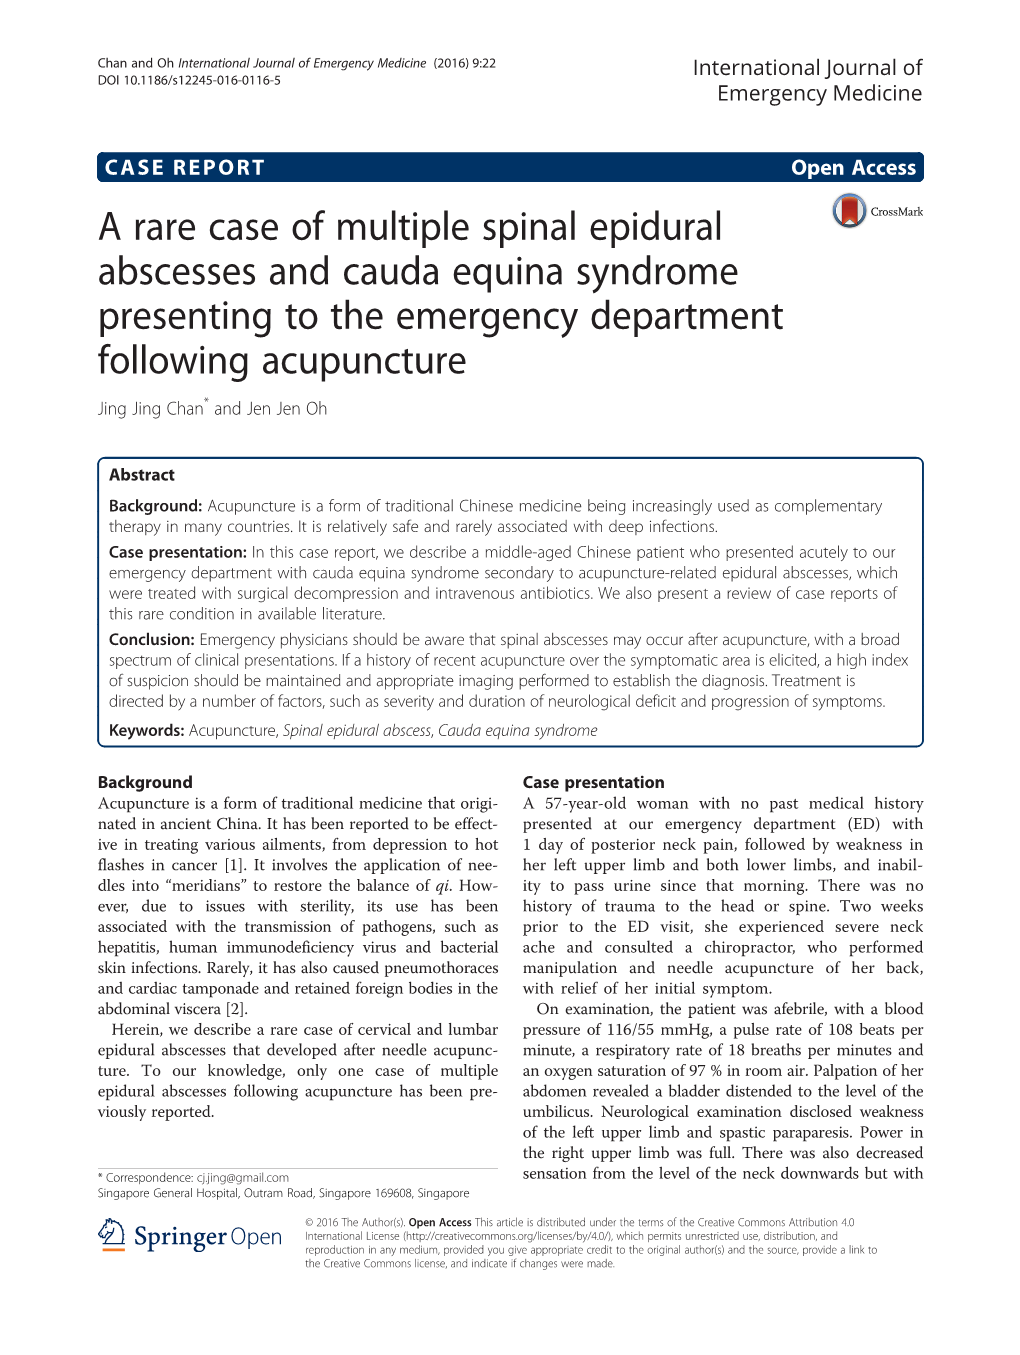 A Rare Case of Multiple Spinal Epidural Abscesses and Cauda Equina